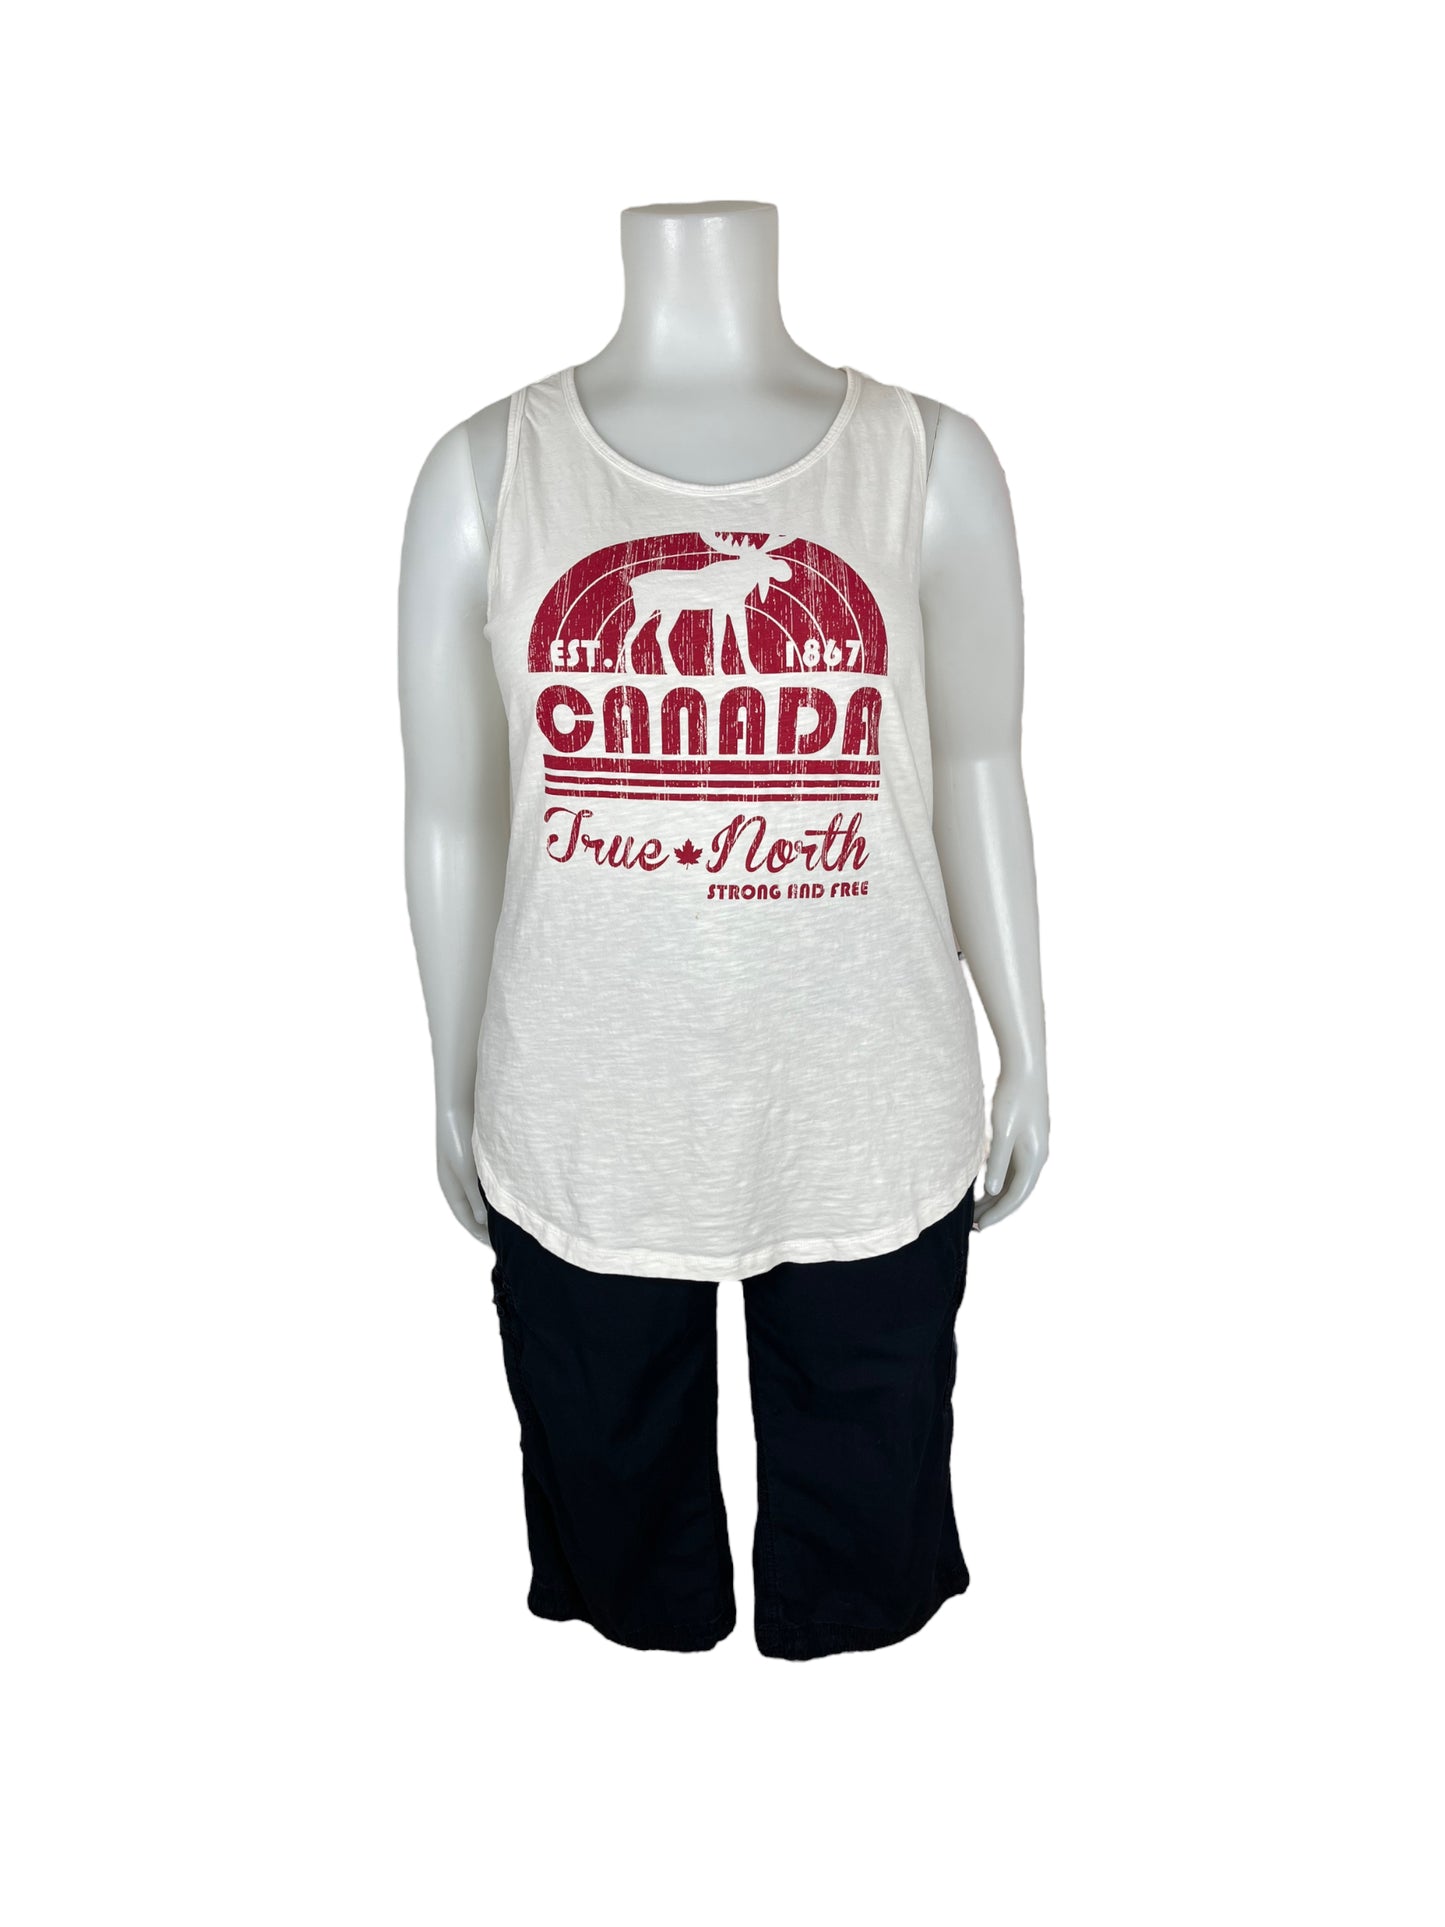 “Canadiana” Canada Graphic Tank Top ‘Canada True North Strong and Free’ (3X)